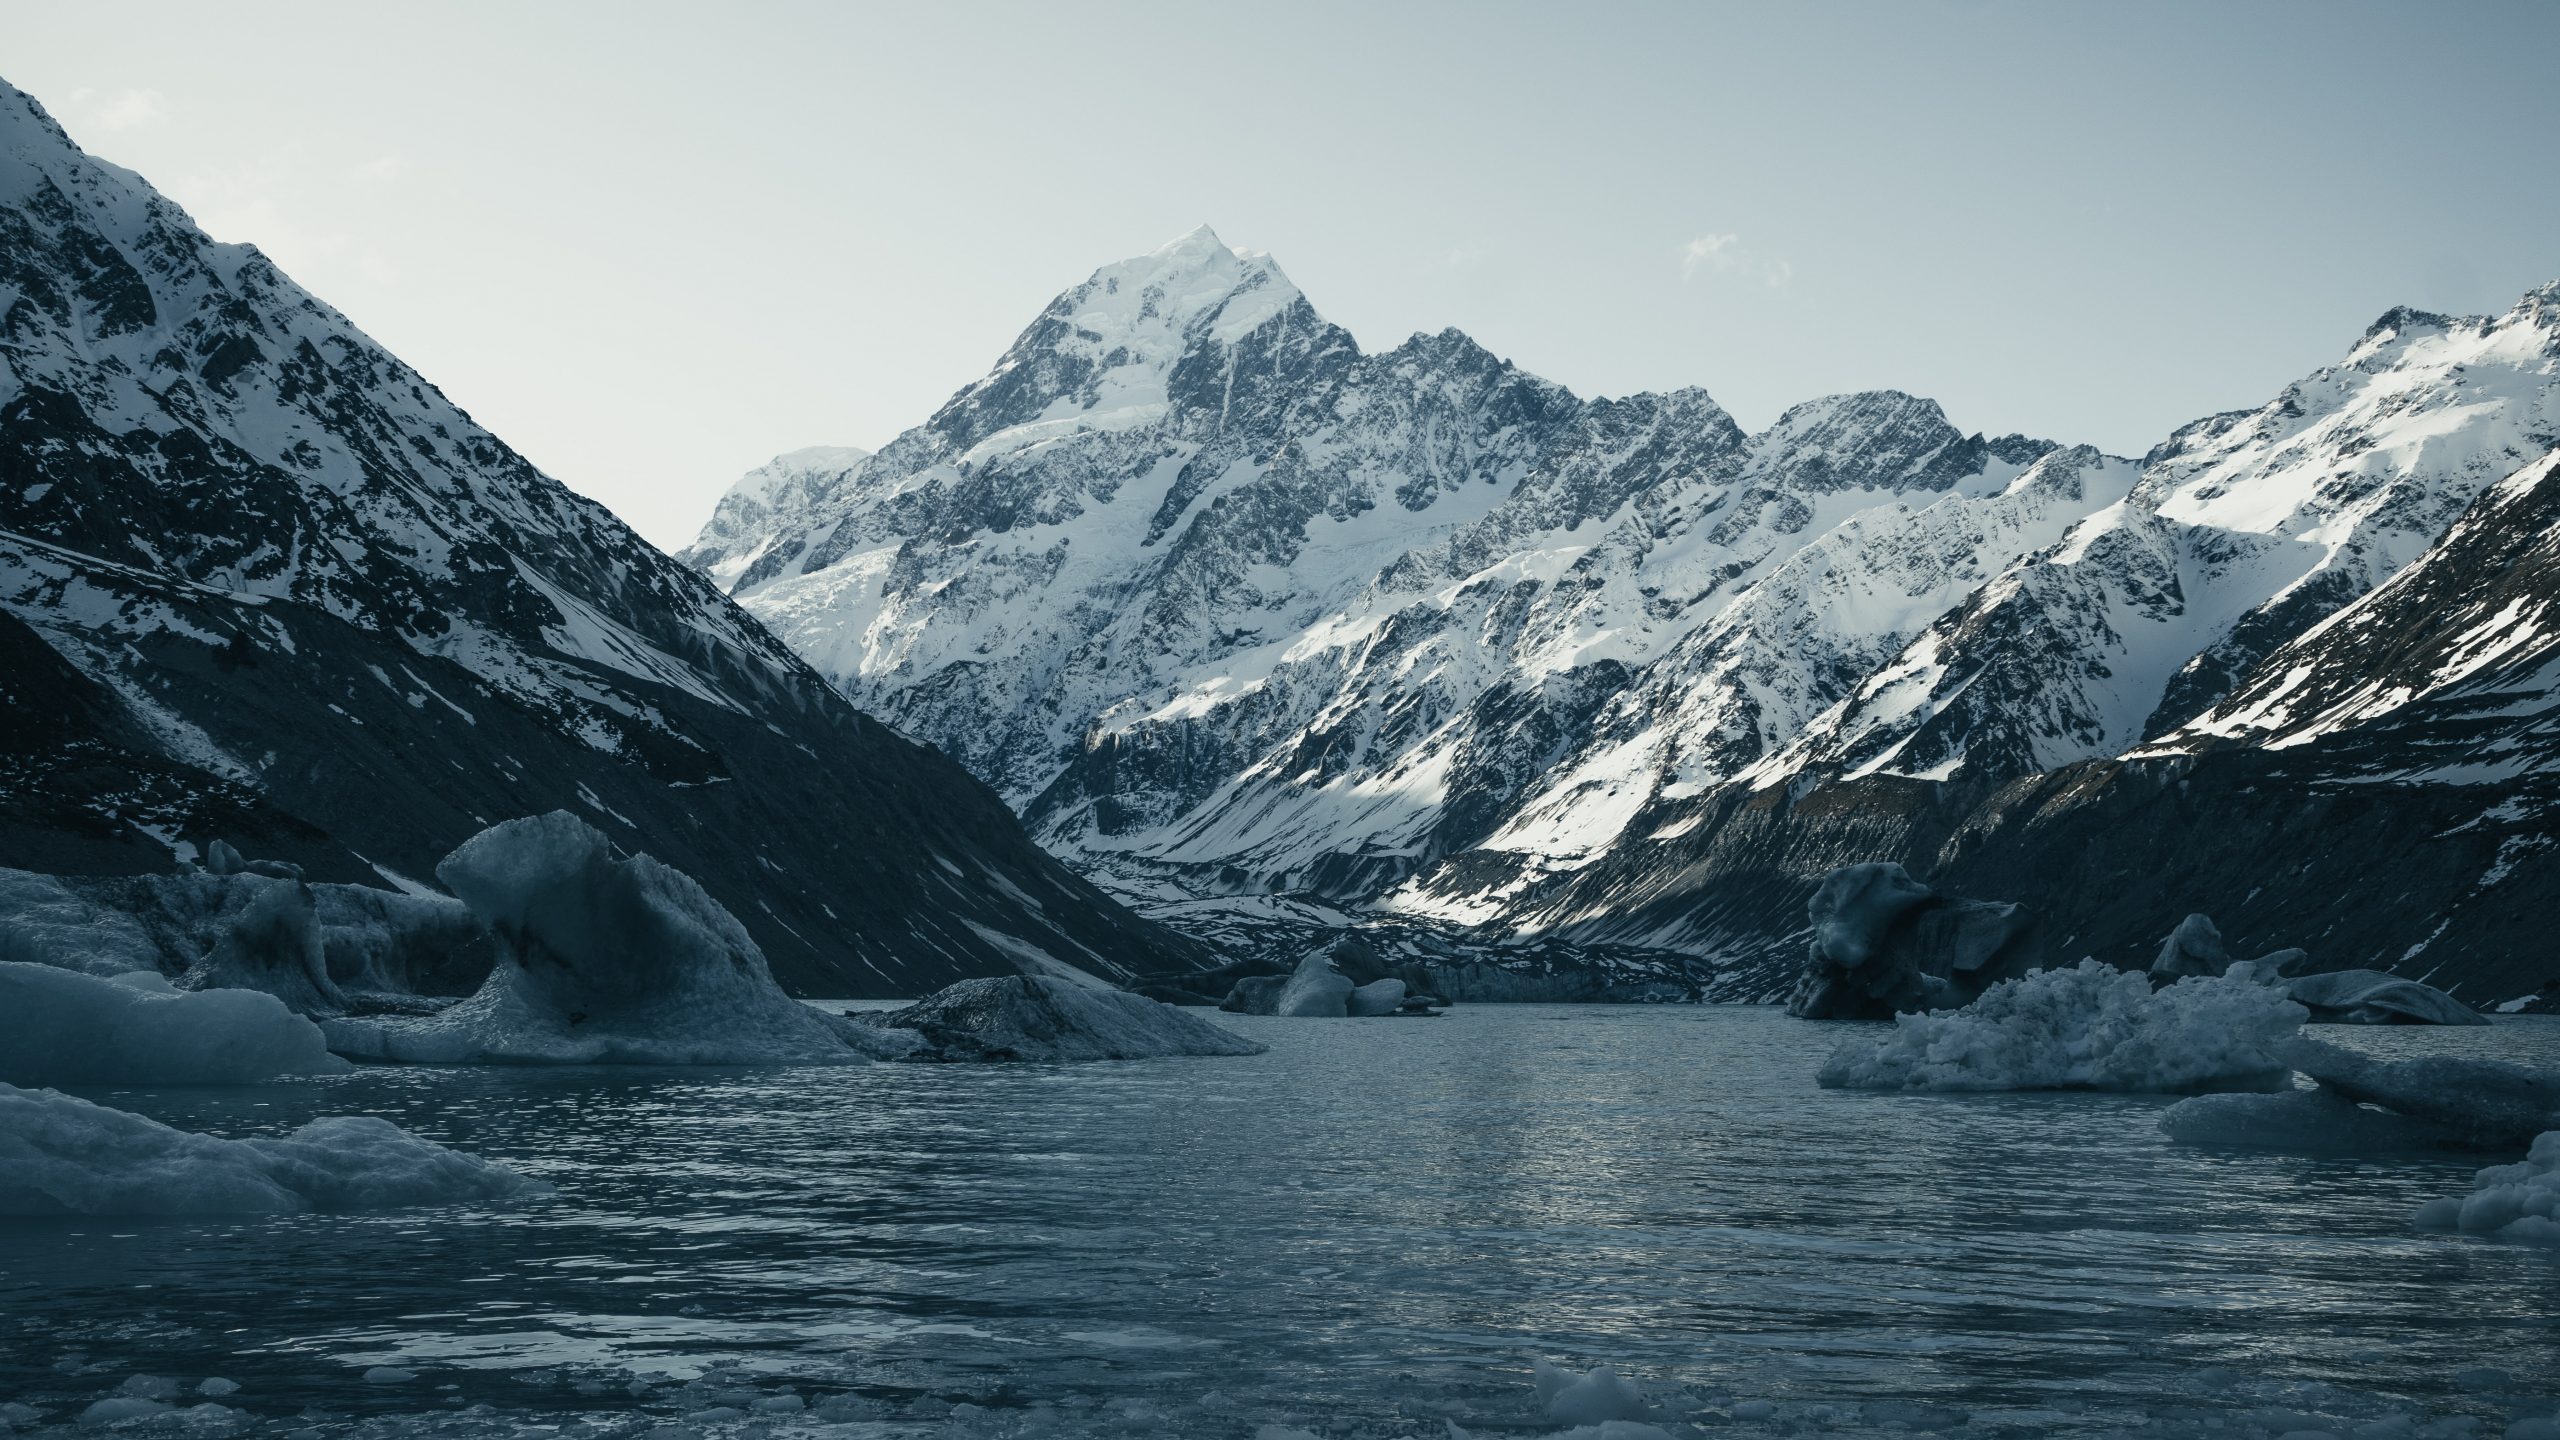 A glacial lake with ice floating in it flanked by a 3000 metre snow-capped mountain.